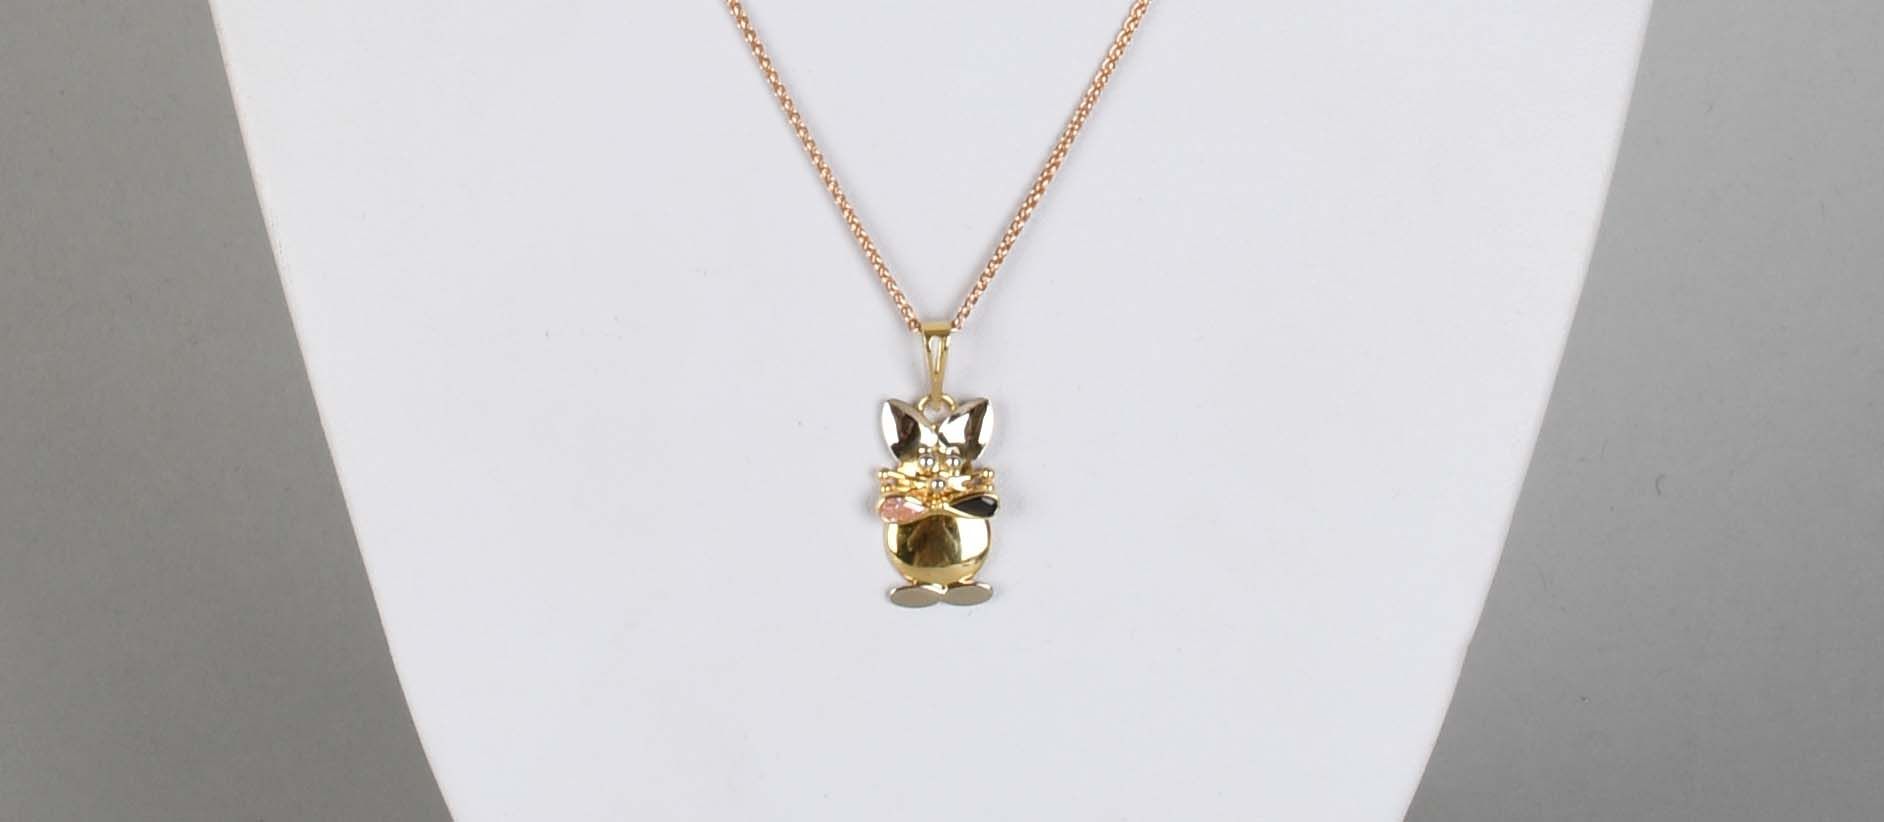 Null Jewel

Pendant in the shape of a cat, in yellow gold eighteen carats set wi&hellip;